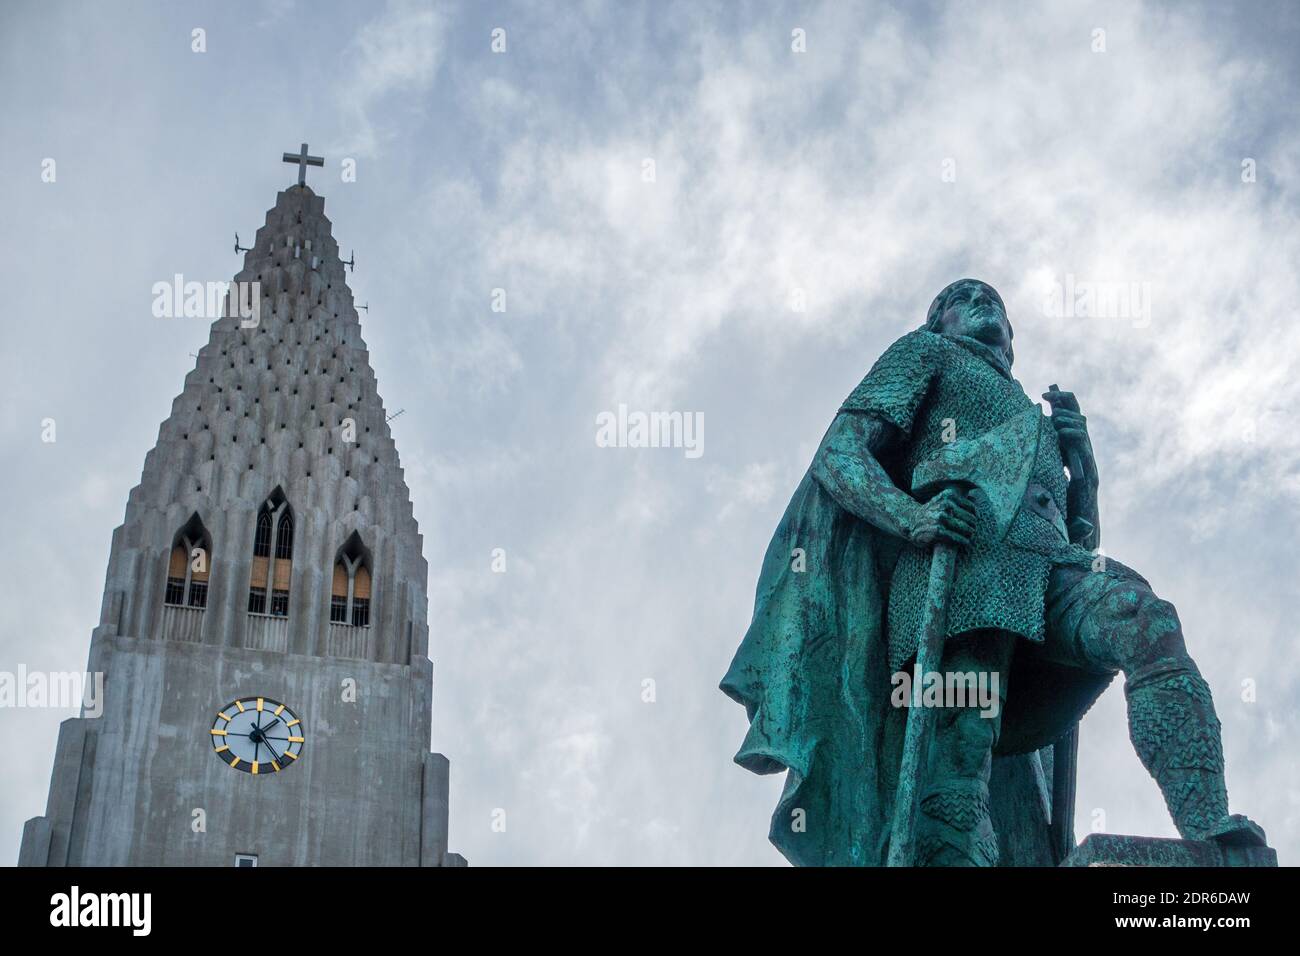 Statue Of Leif Erikson In Front Of The Lutheran Church of Hallgrimur In Reykjavik Iceland The Tallest Building In Iceland A Landmark In Reykjavik Stock Photo